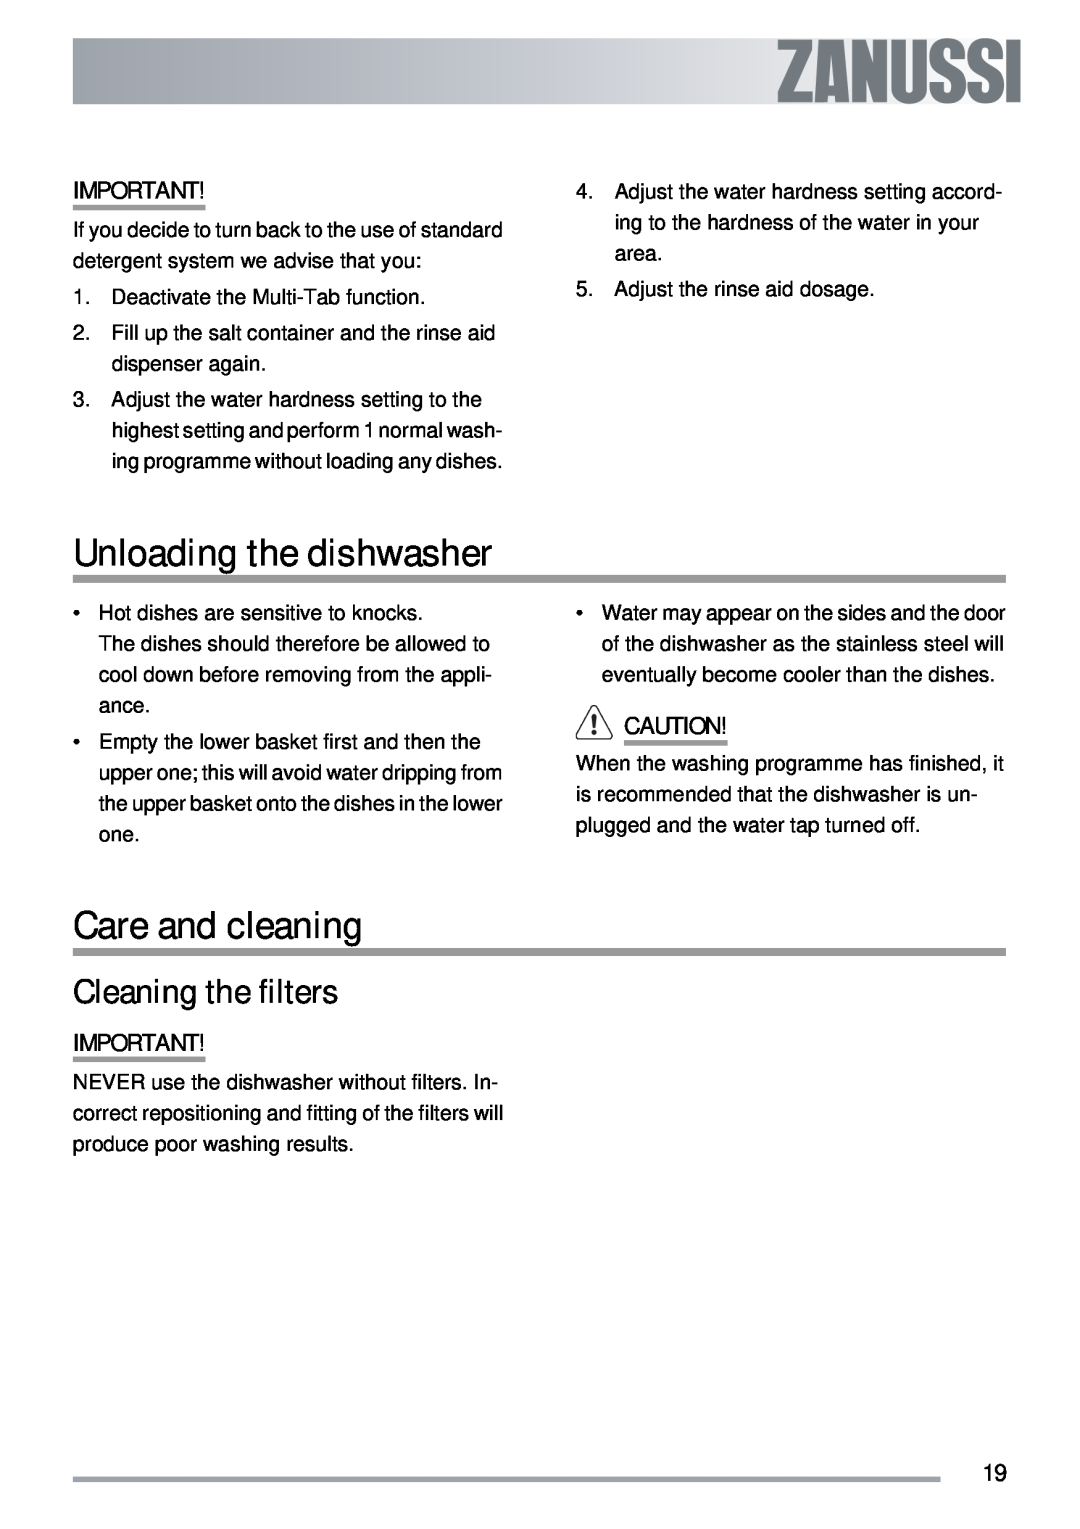 Zanussi ZDT 311 user manual Unloading the dishwasher, Care and cleaning, Cleaning the filters 